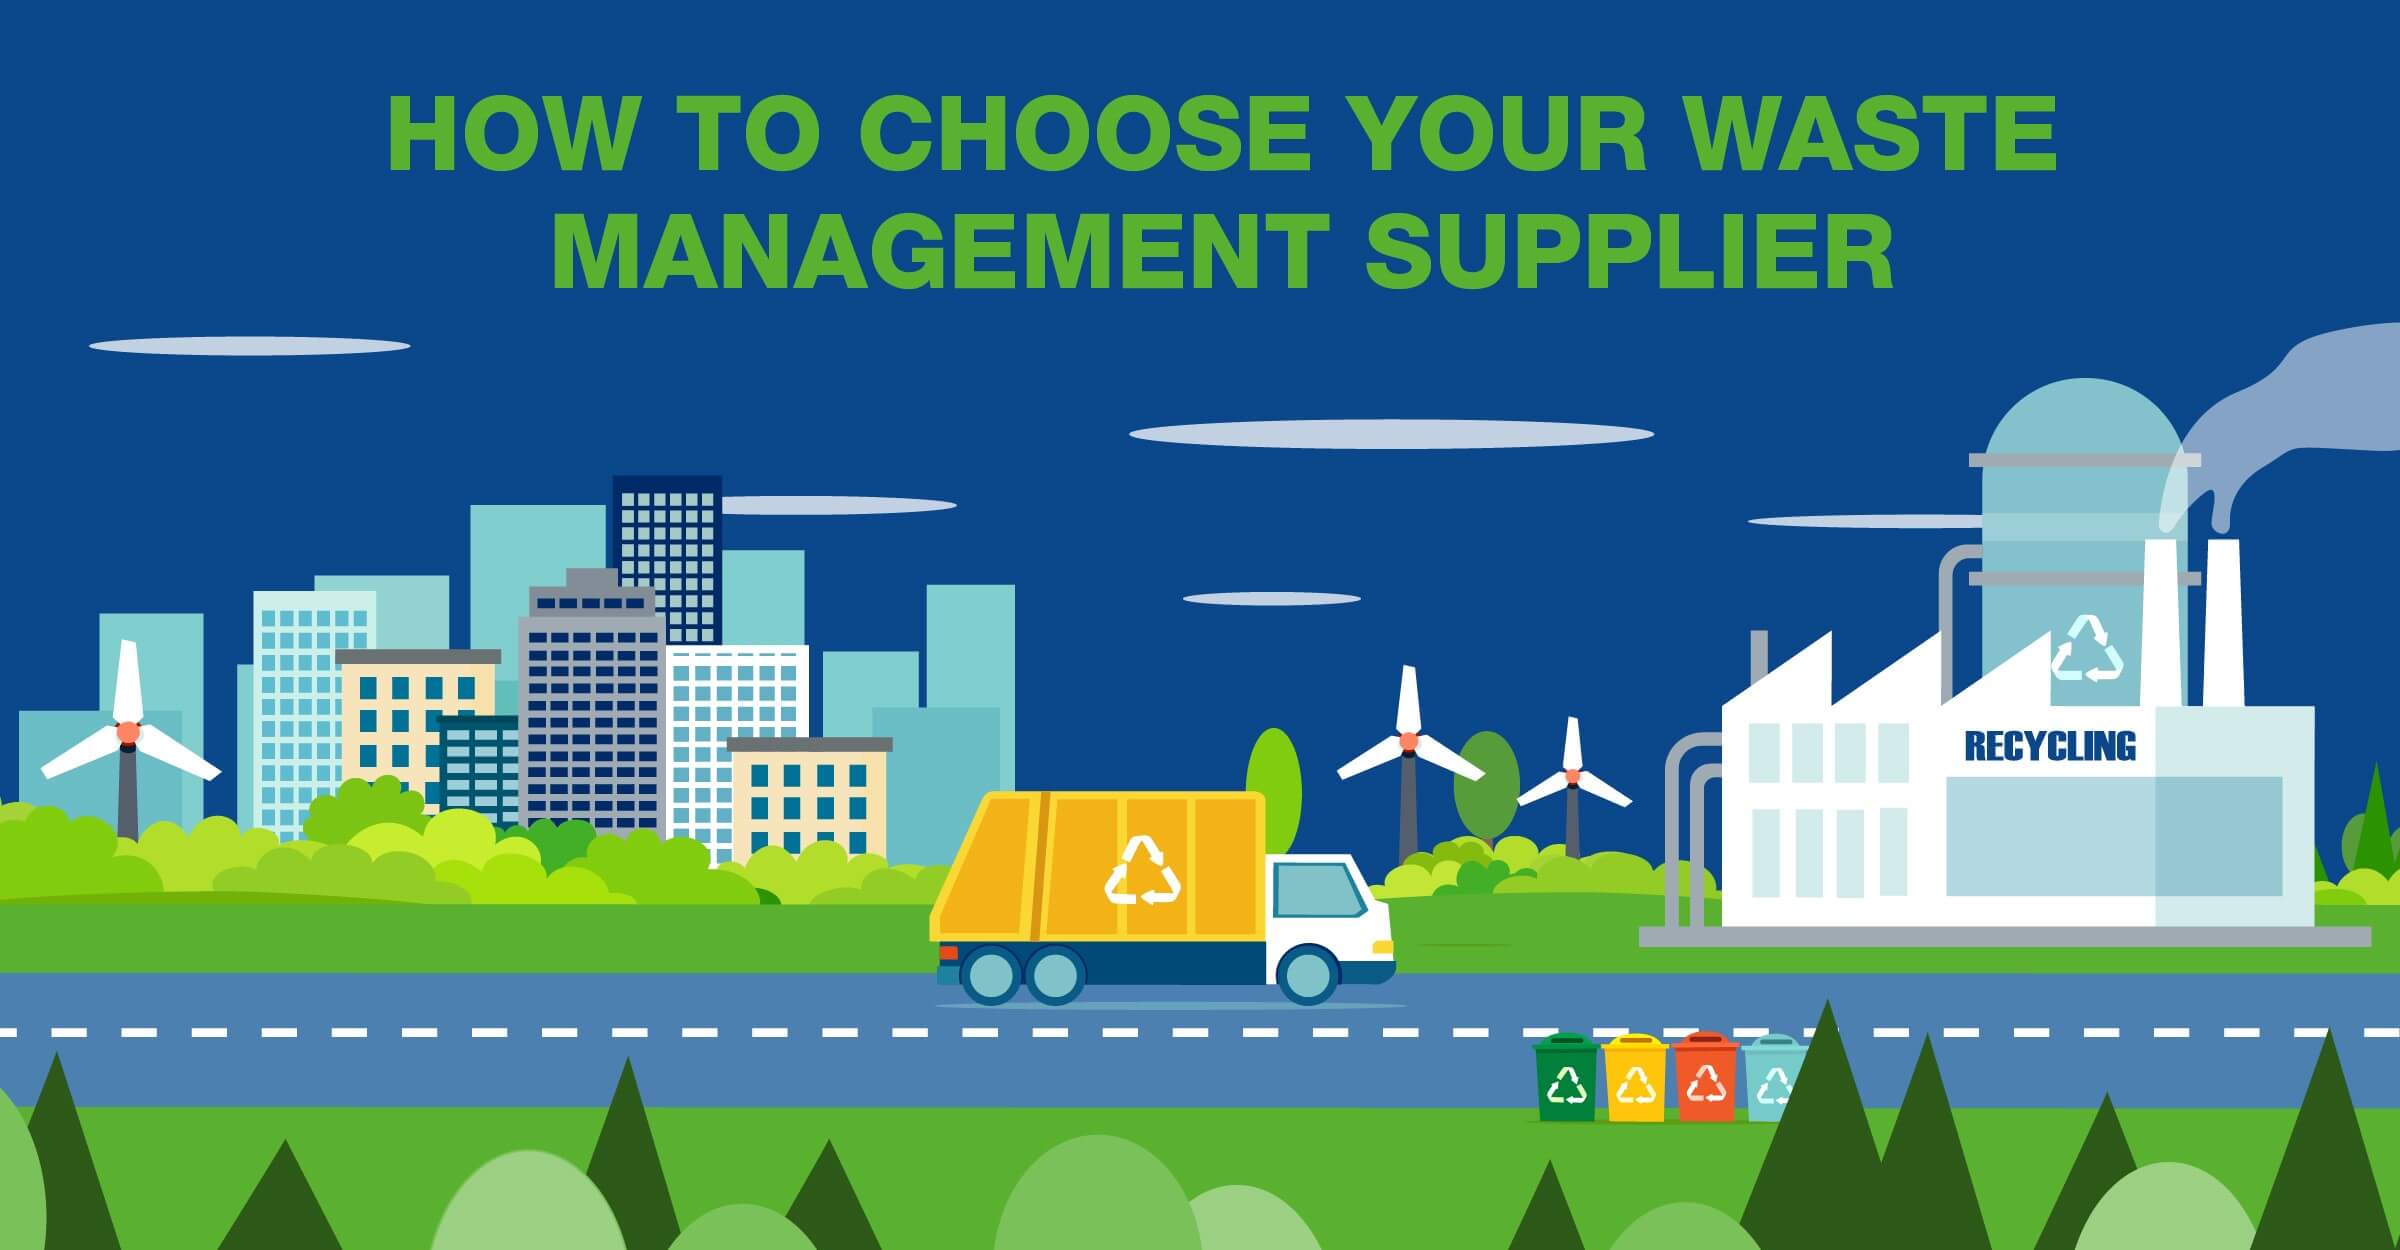 How to choose your waste management service company in 2021 | Yorwaste